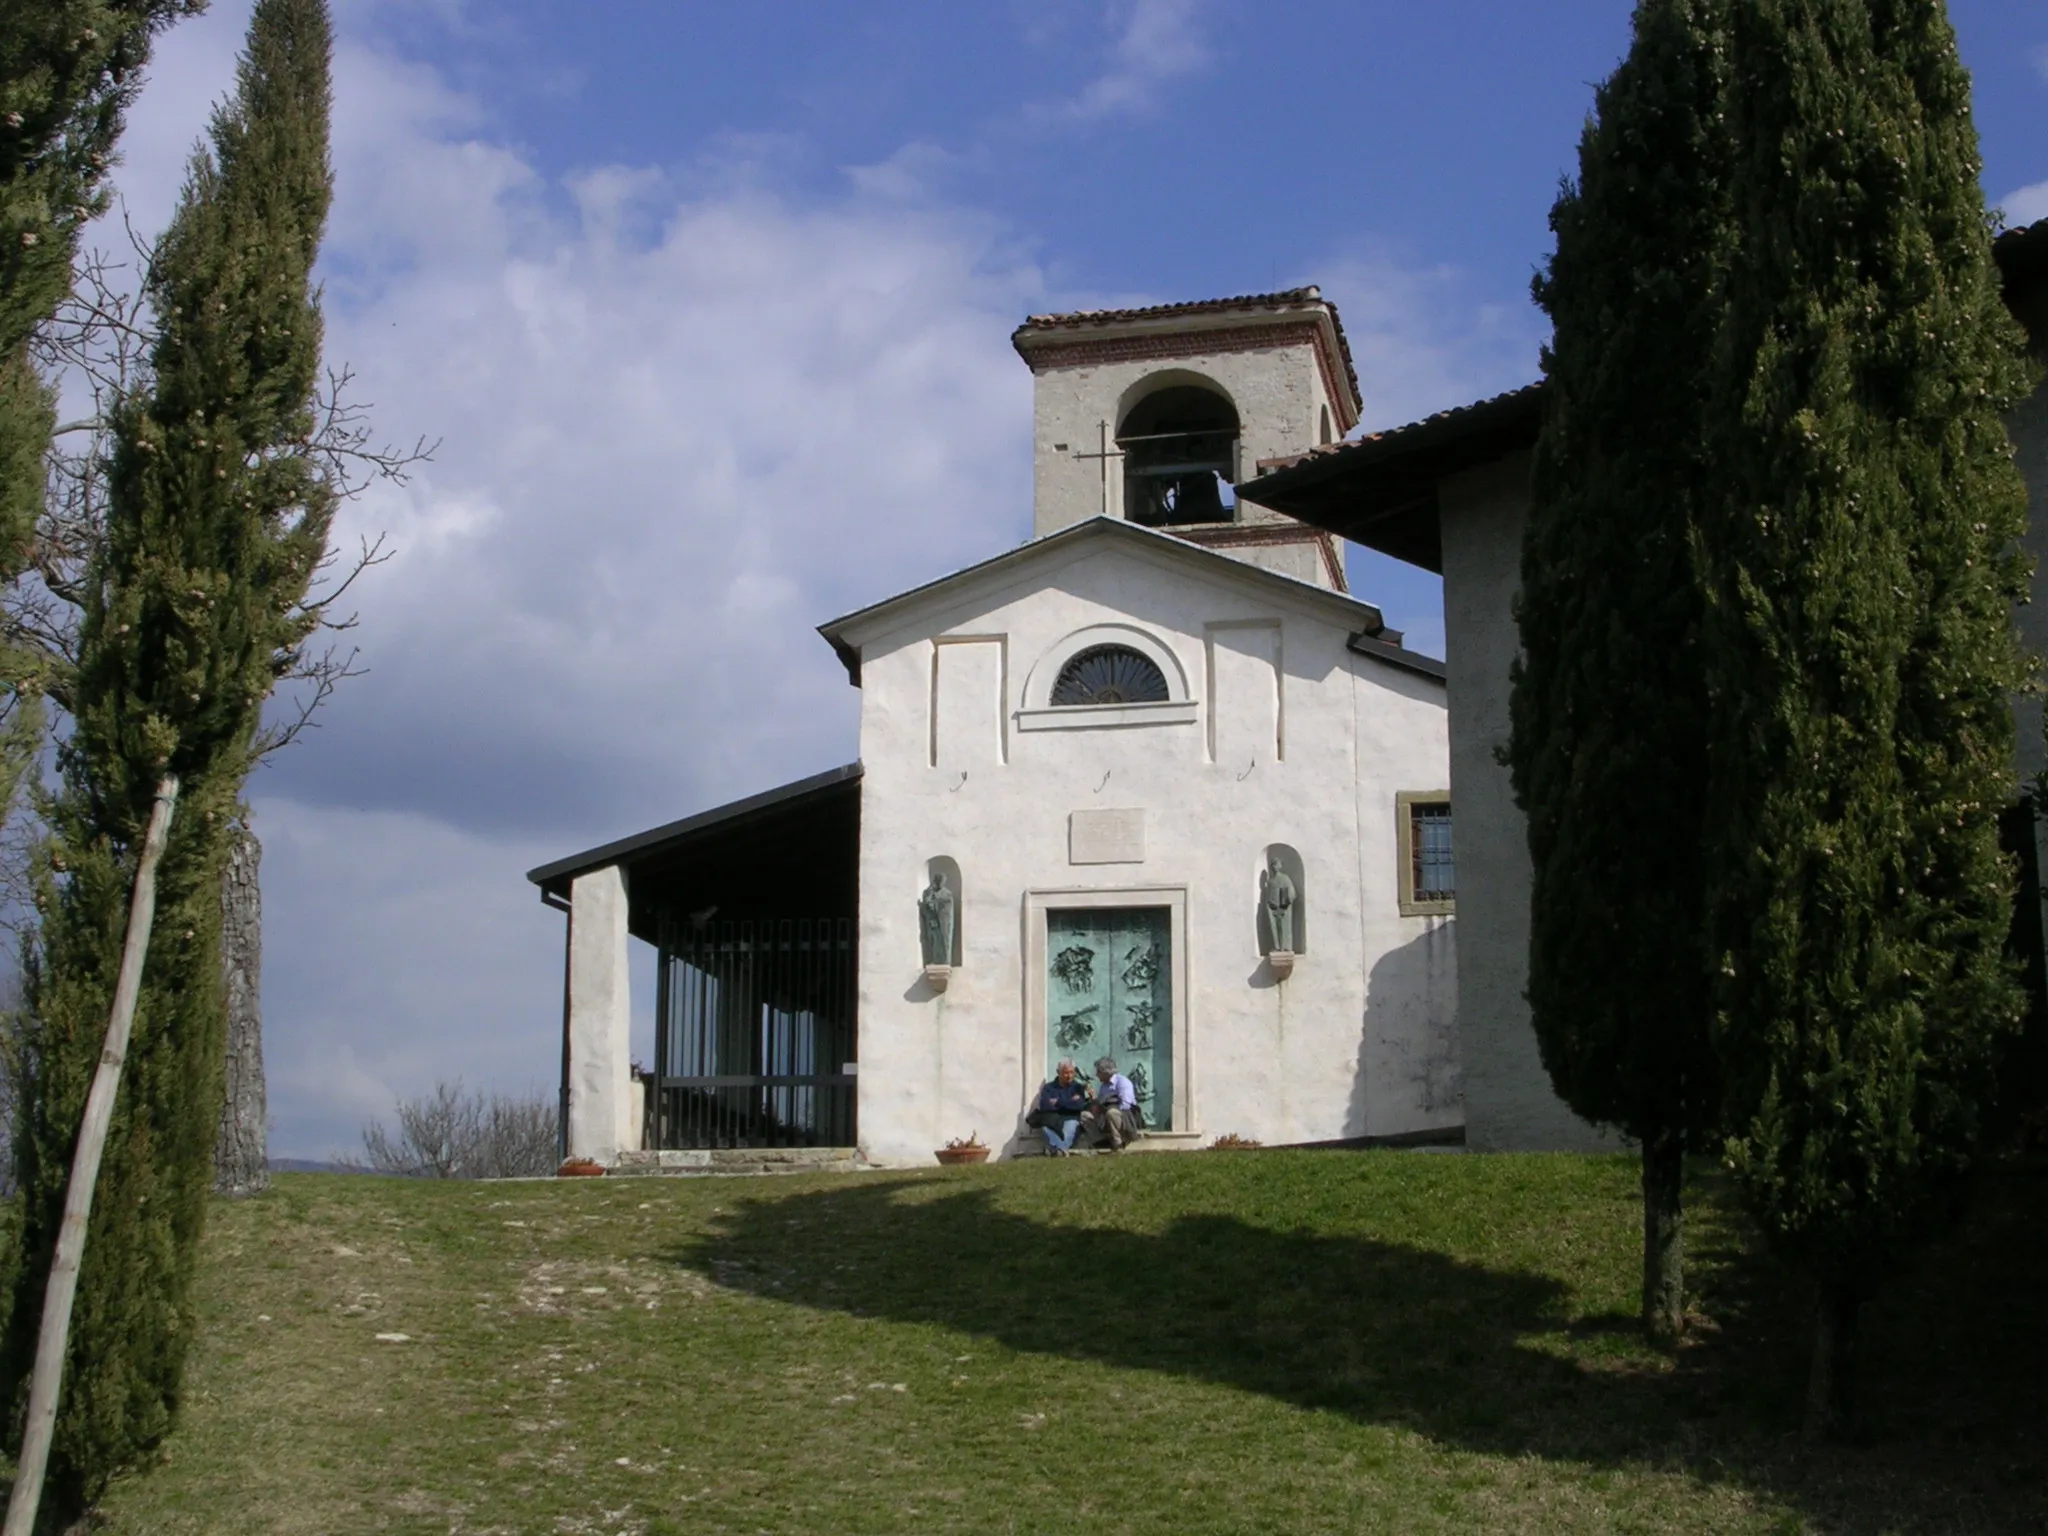 Image of San Paolo d'Argon